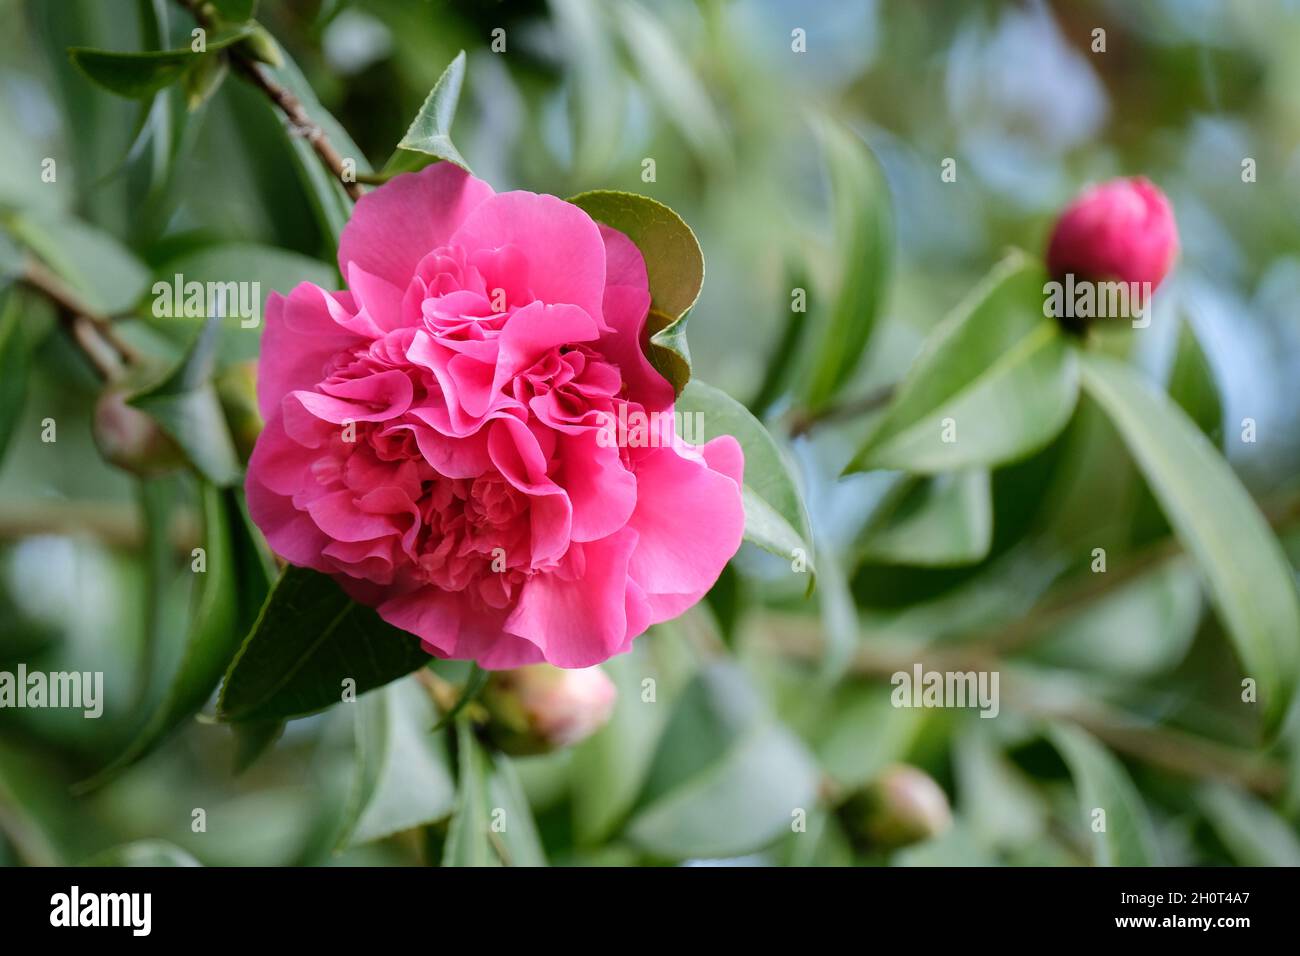 Hybrid camellia, Camellia x williamsii 'Debbie', large, rose-pink flowers in late winter/ early spring Stock Photo